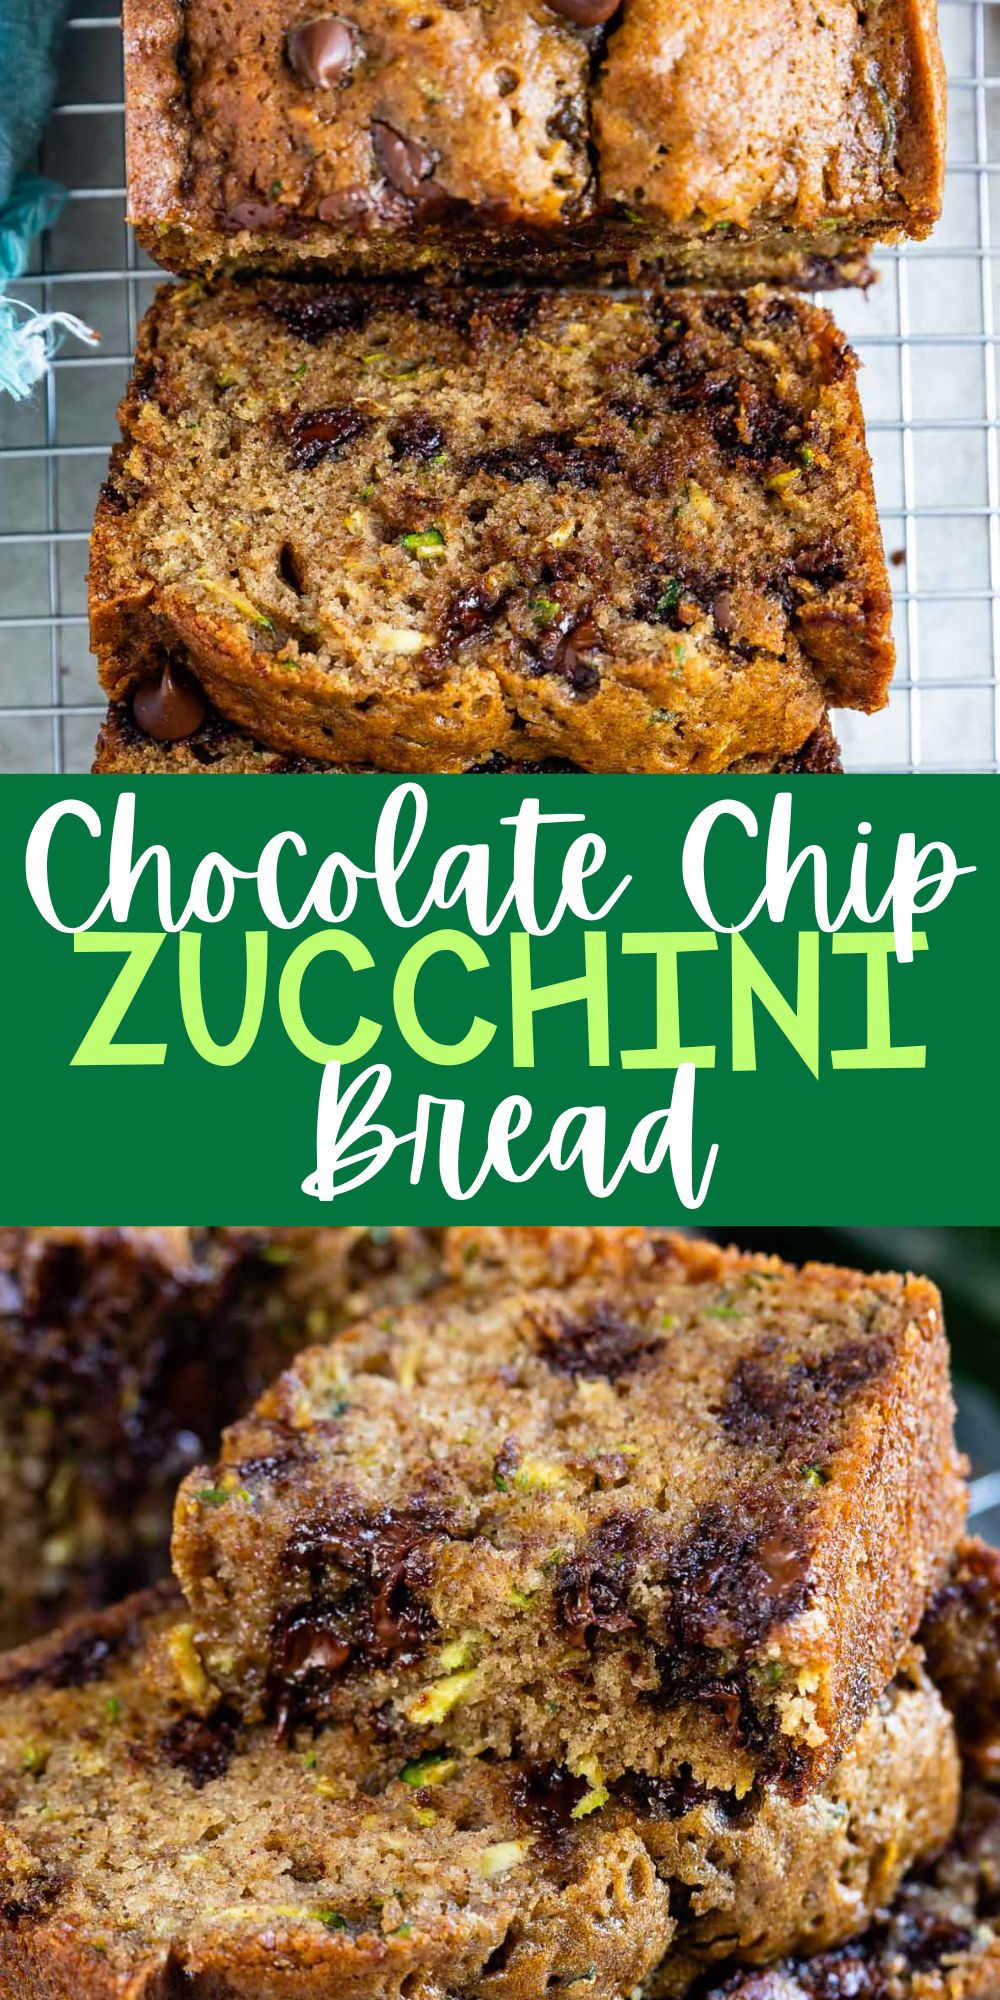 two photos of sliced bread with chocolate chips and zucchini baked in and words on the image.